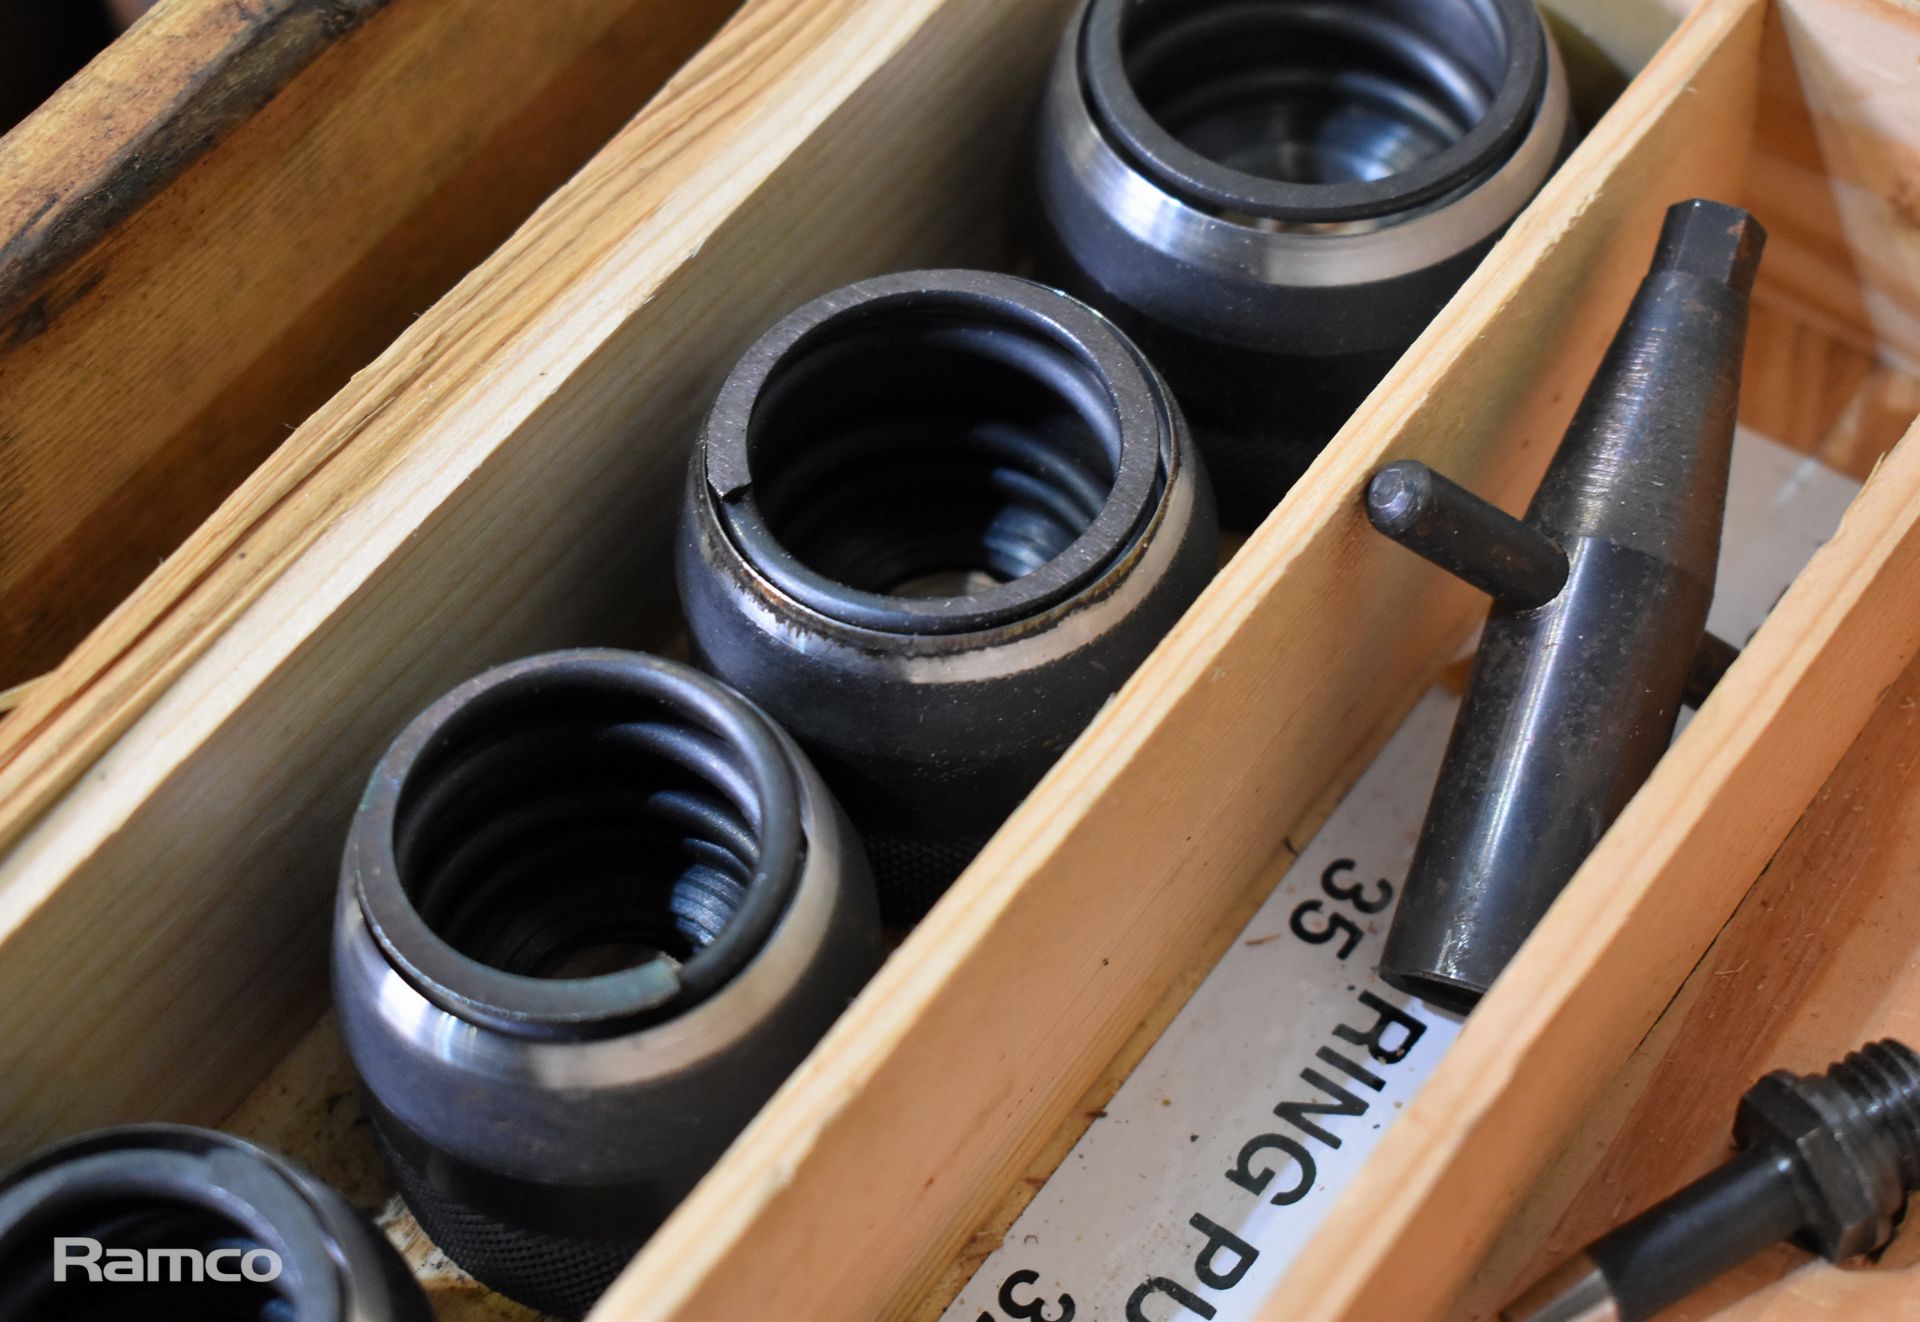 2x Maby Ring punch sets in wooden storage boxes - INCOMPLETE - Image 5 of 5